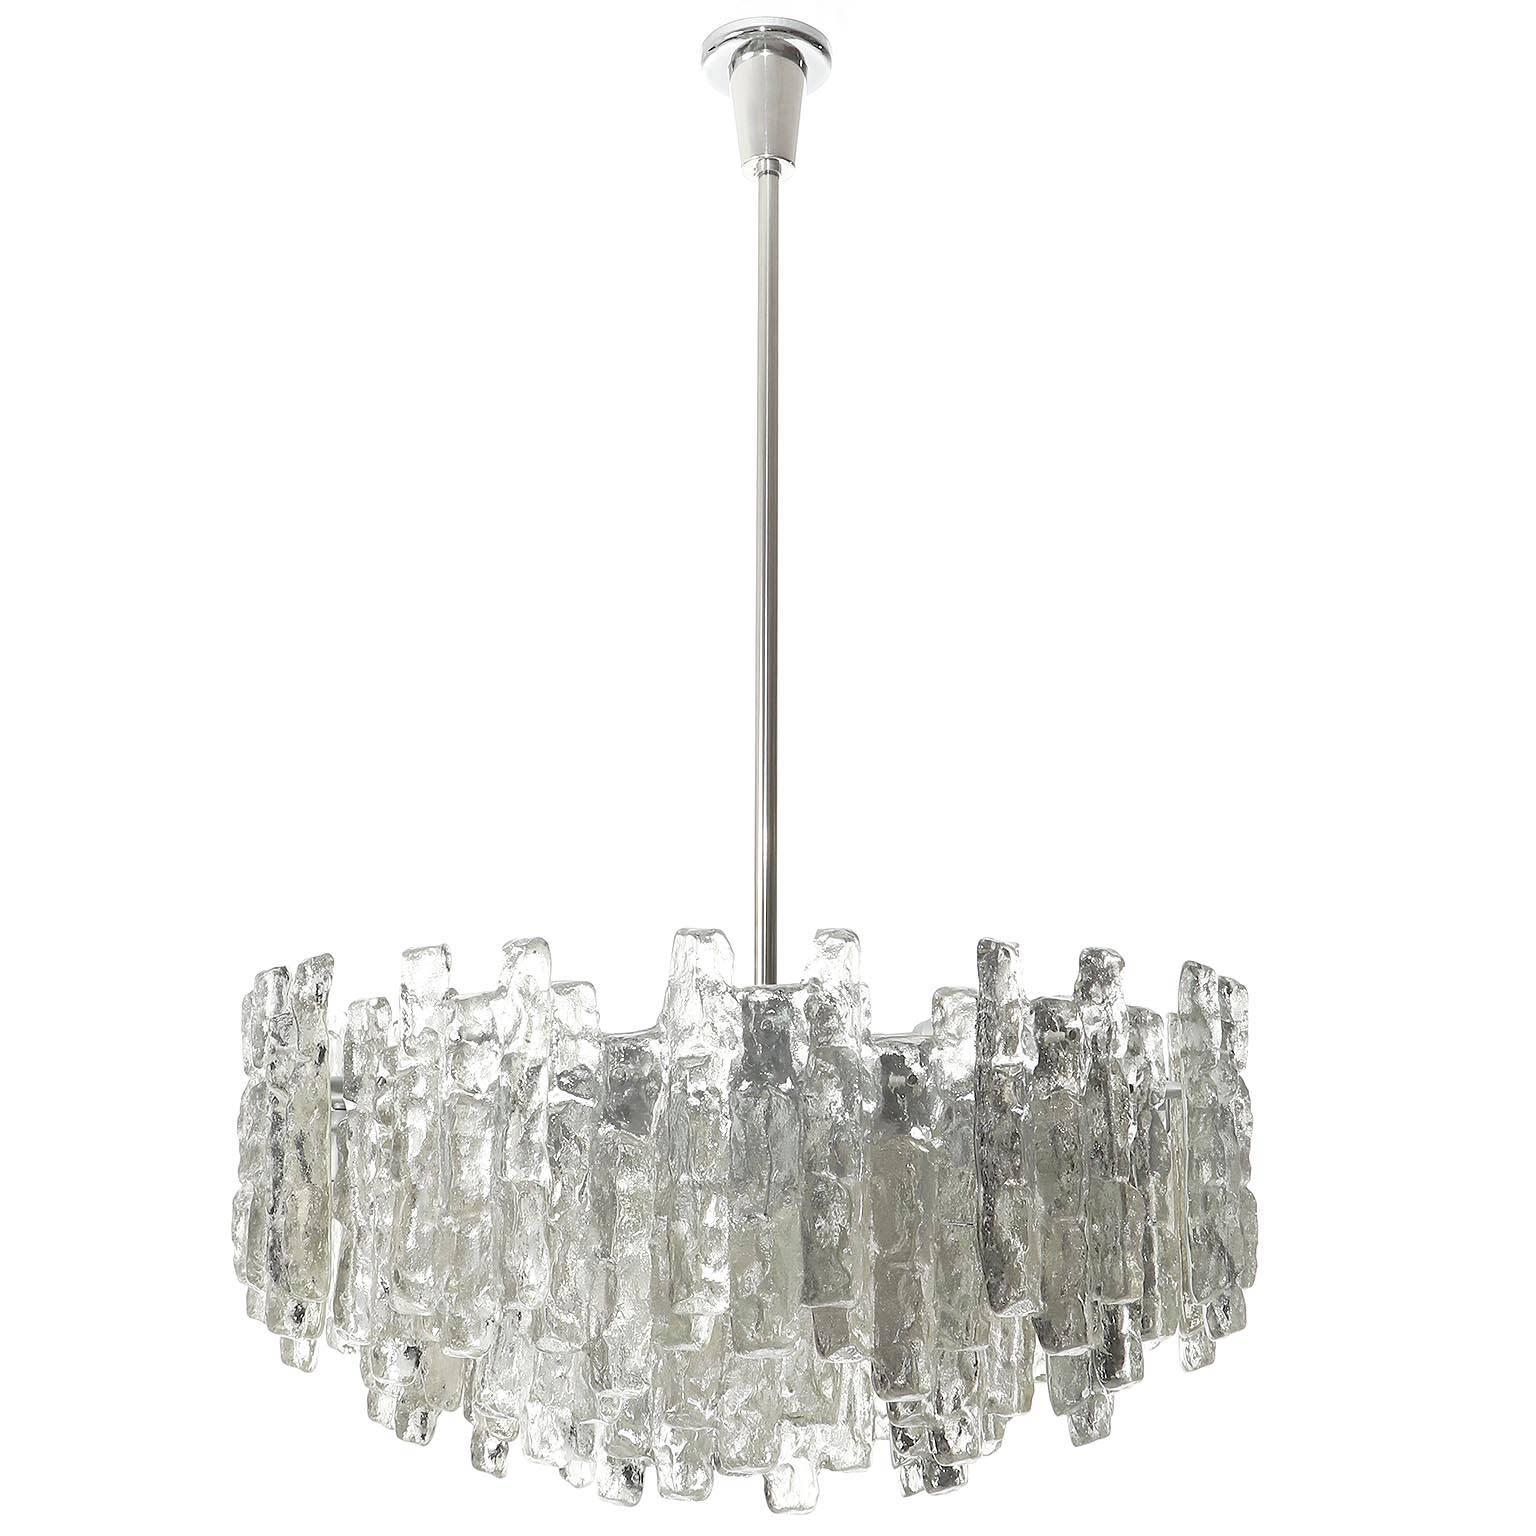 One of two extra large light fixtures model 'SORIA' by Kalmar, Austria, manufactured in midcentury, circa 1970 (late 1960s-early 1970s). These chandeliers are the largest version of this series.
A silver painted metal frame holds 48 large textured